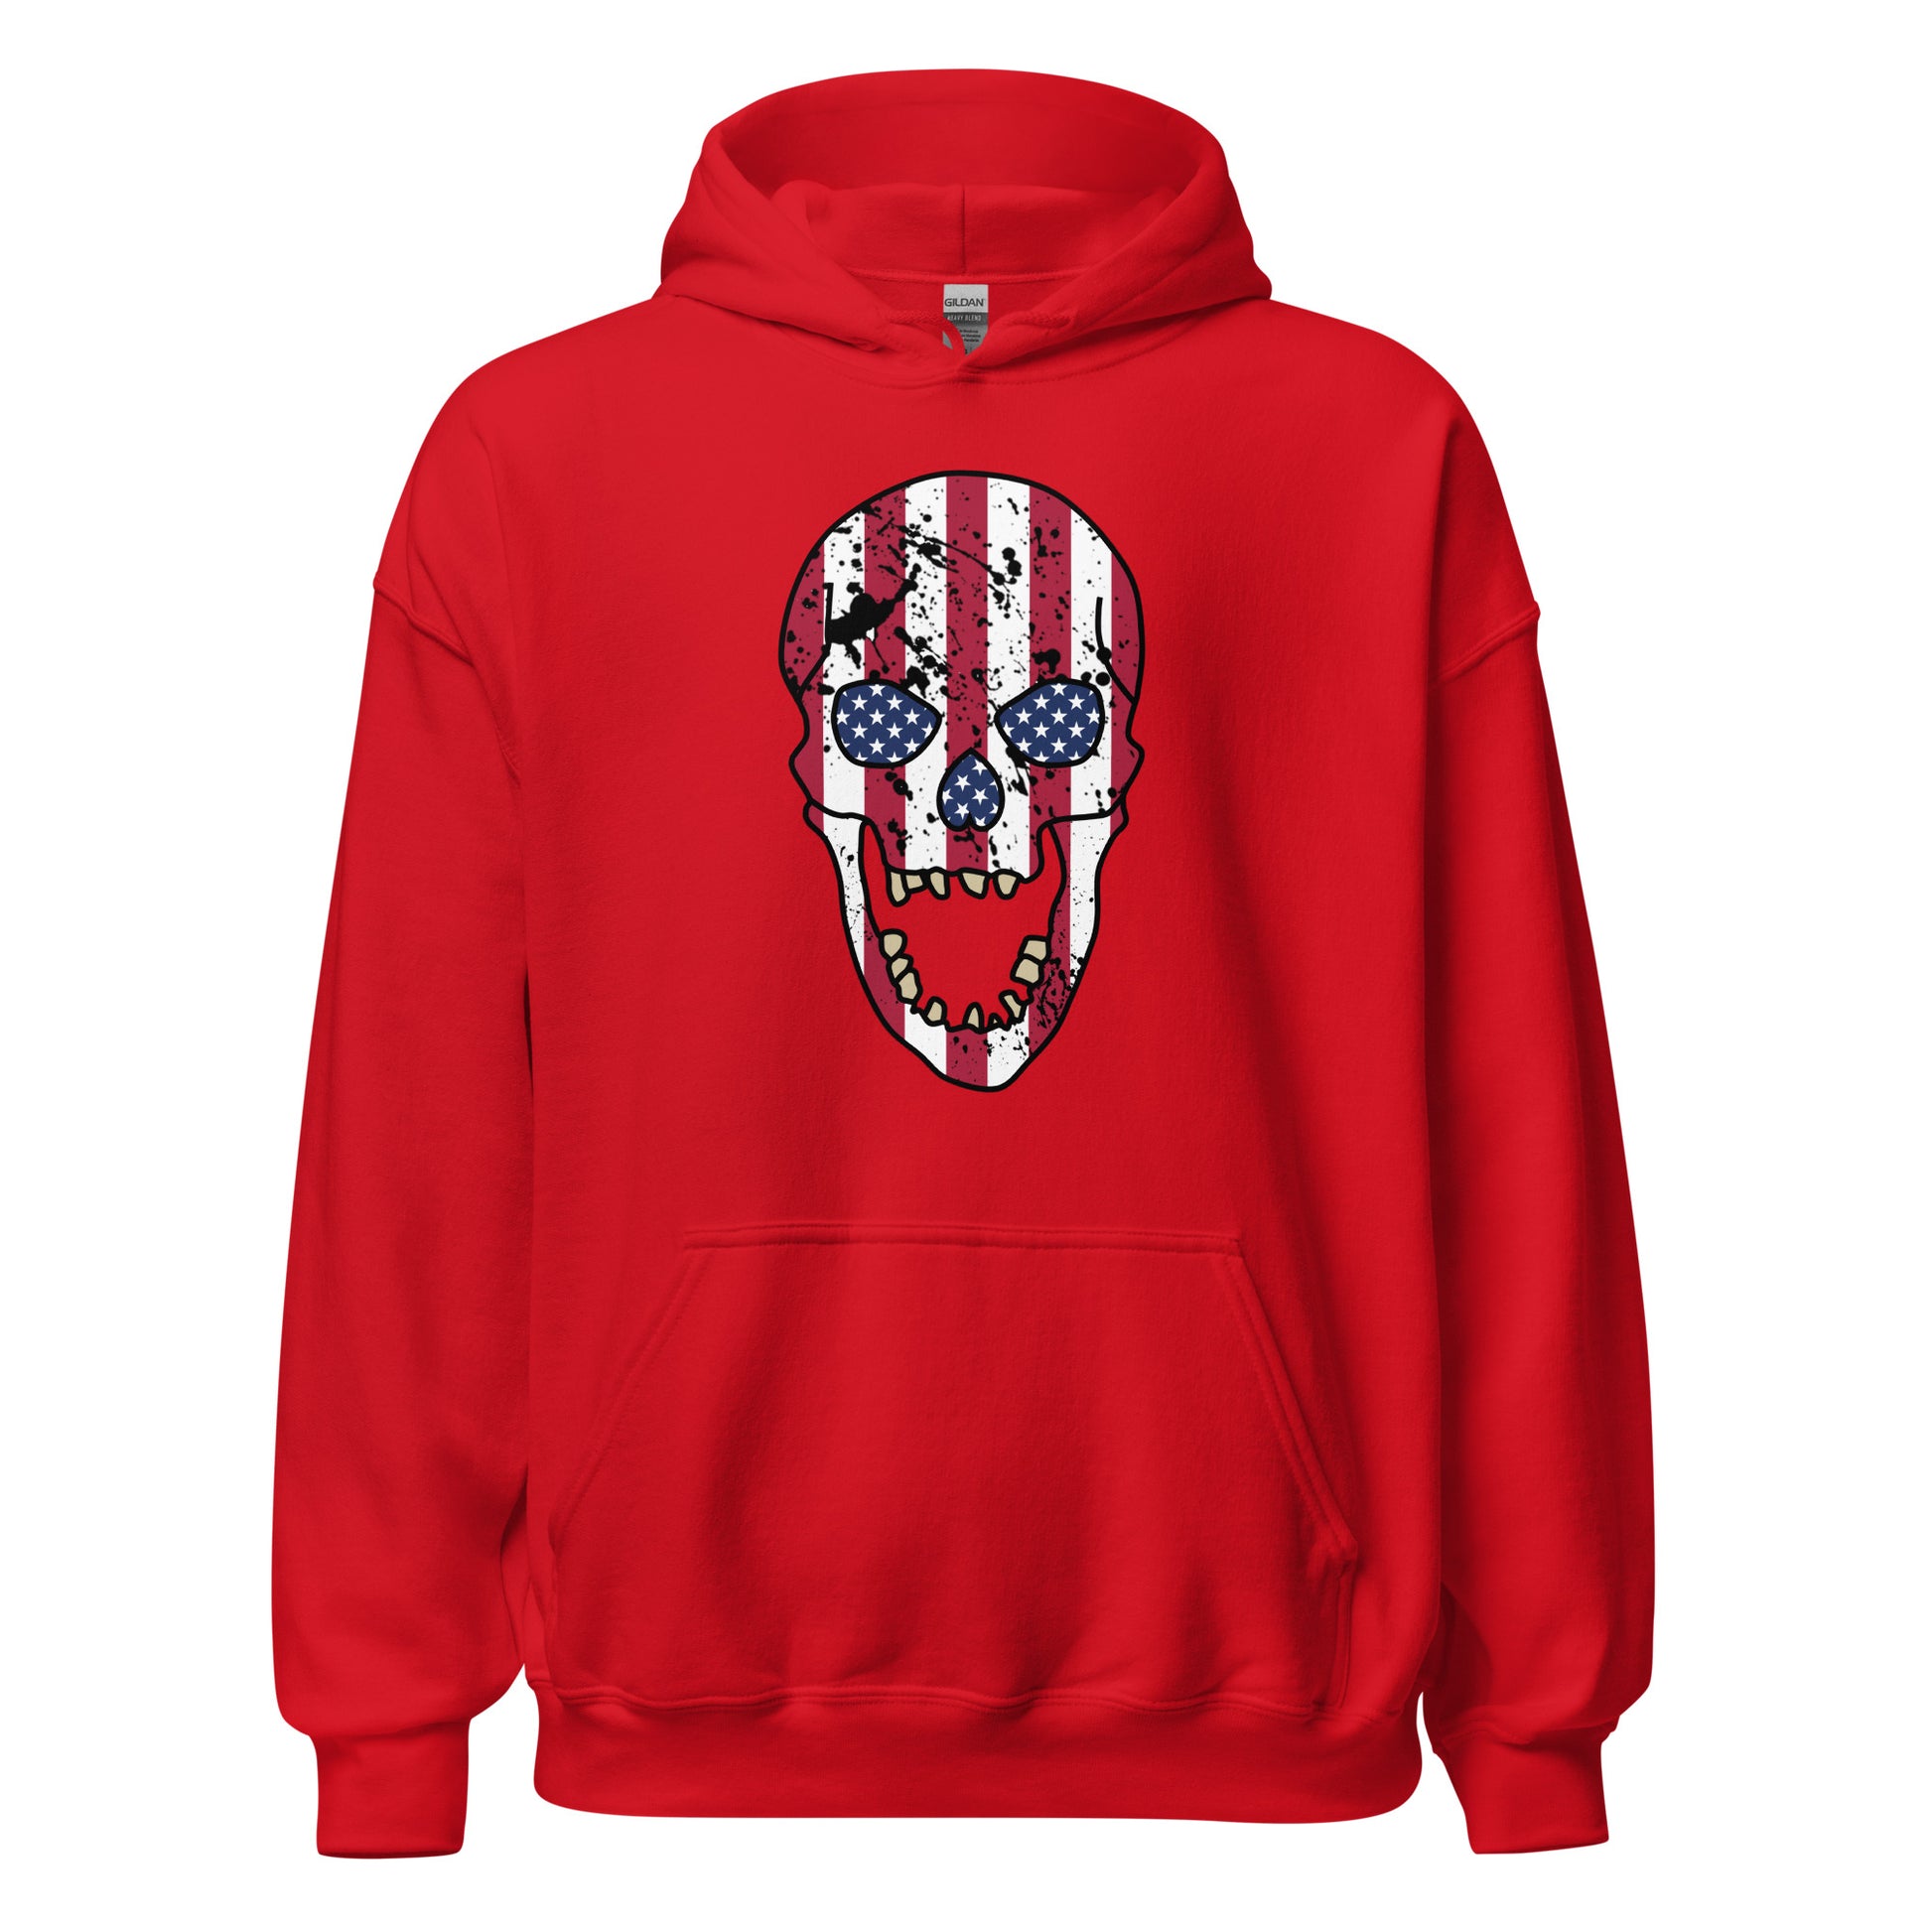 USA Skull Hoodie in Red